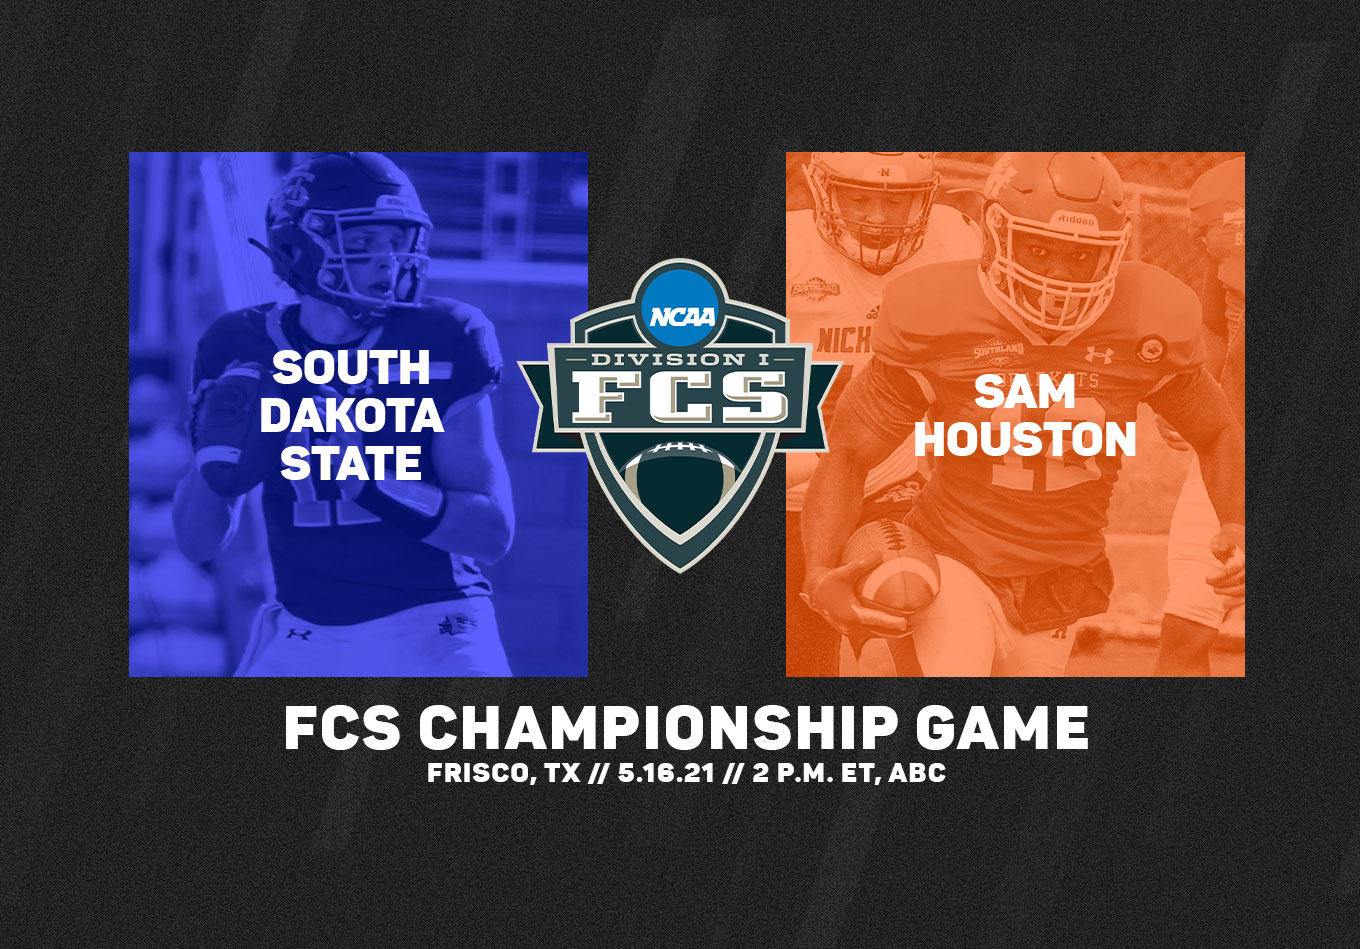 South Dakota State vs. Sam Houston: 10 Numbers to Know Before the FCS Championship Game